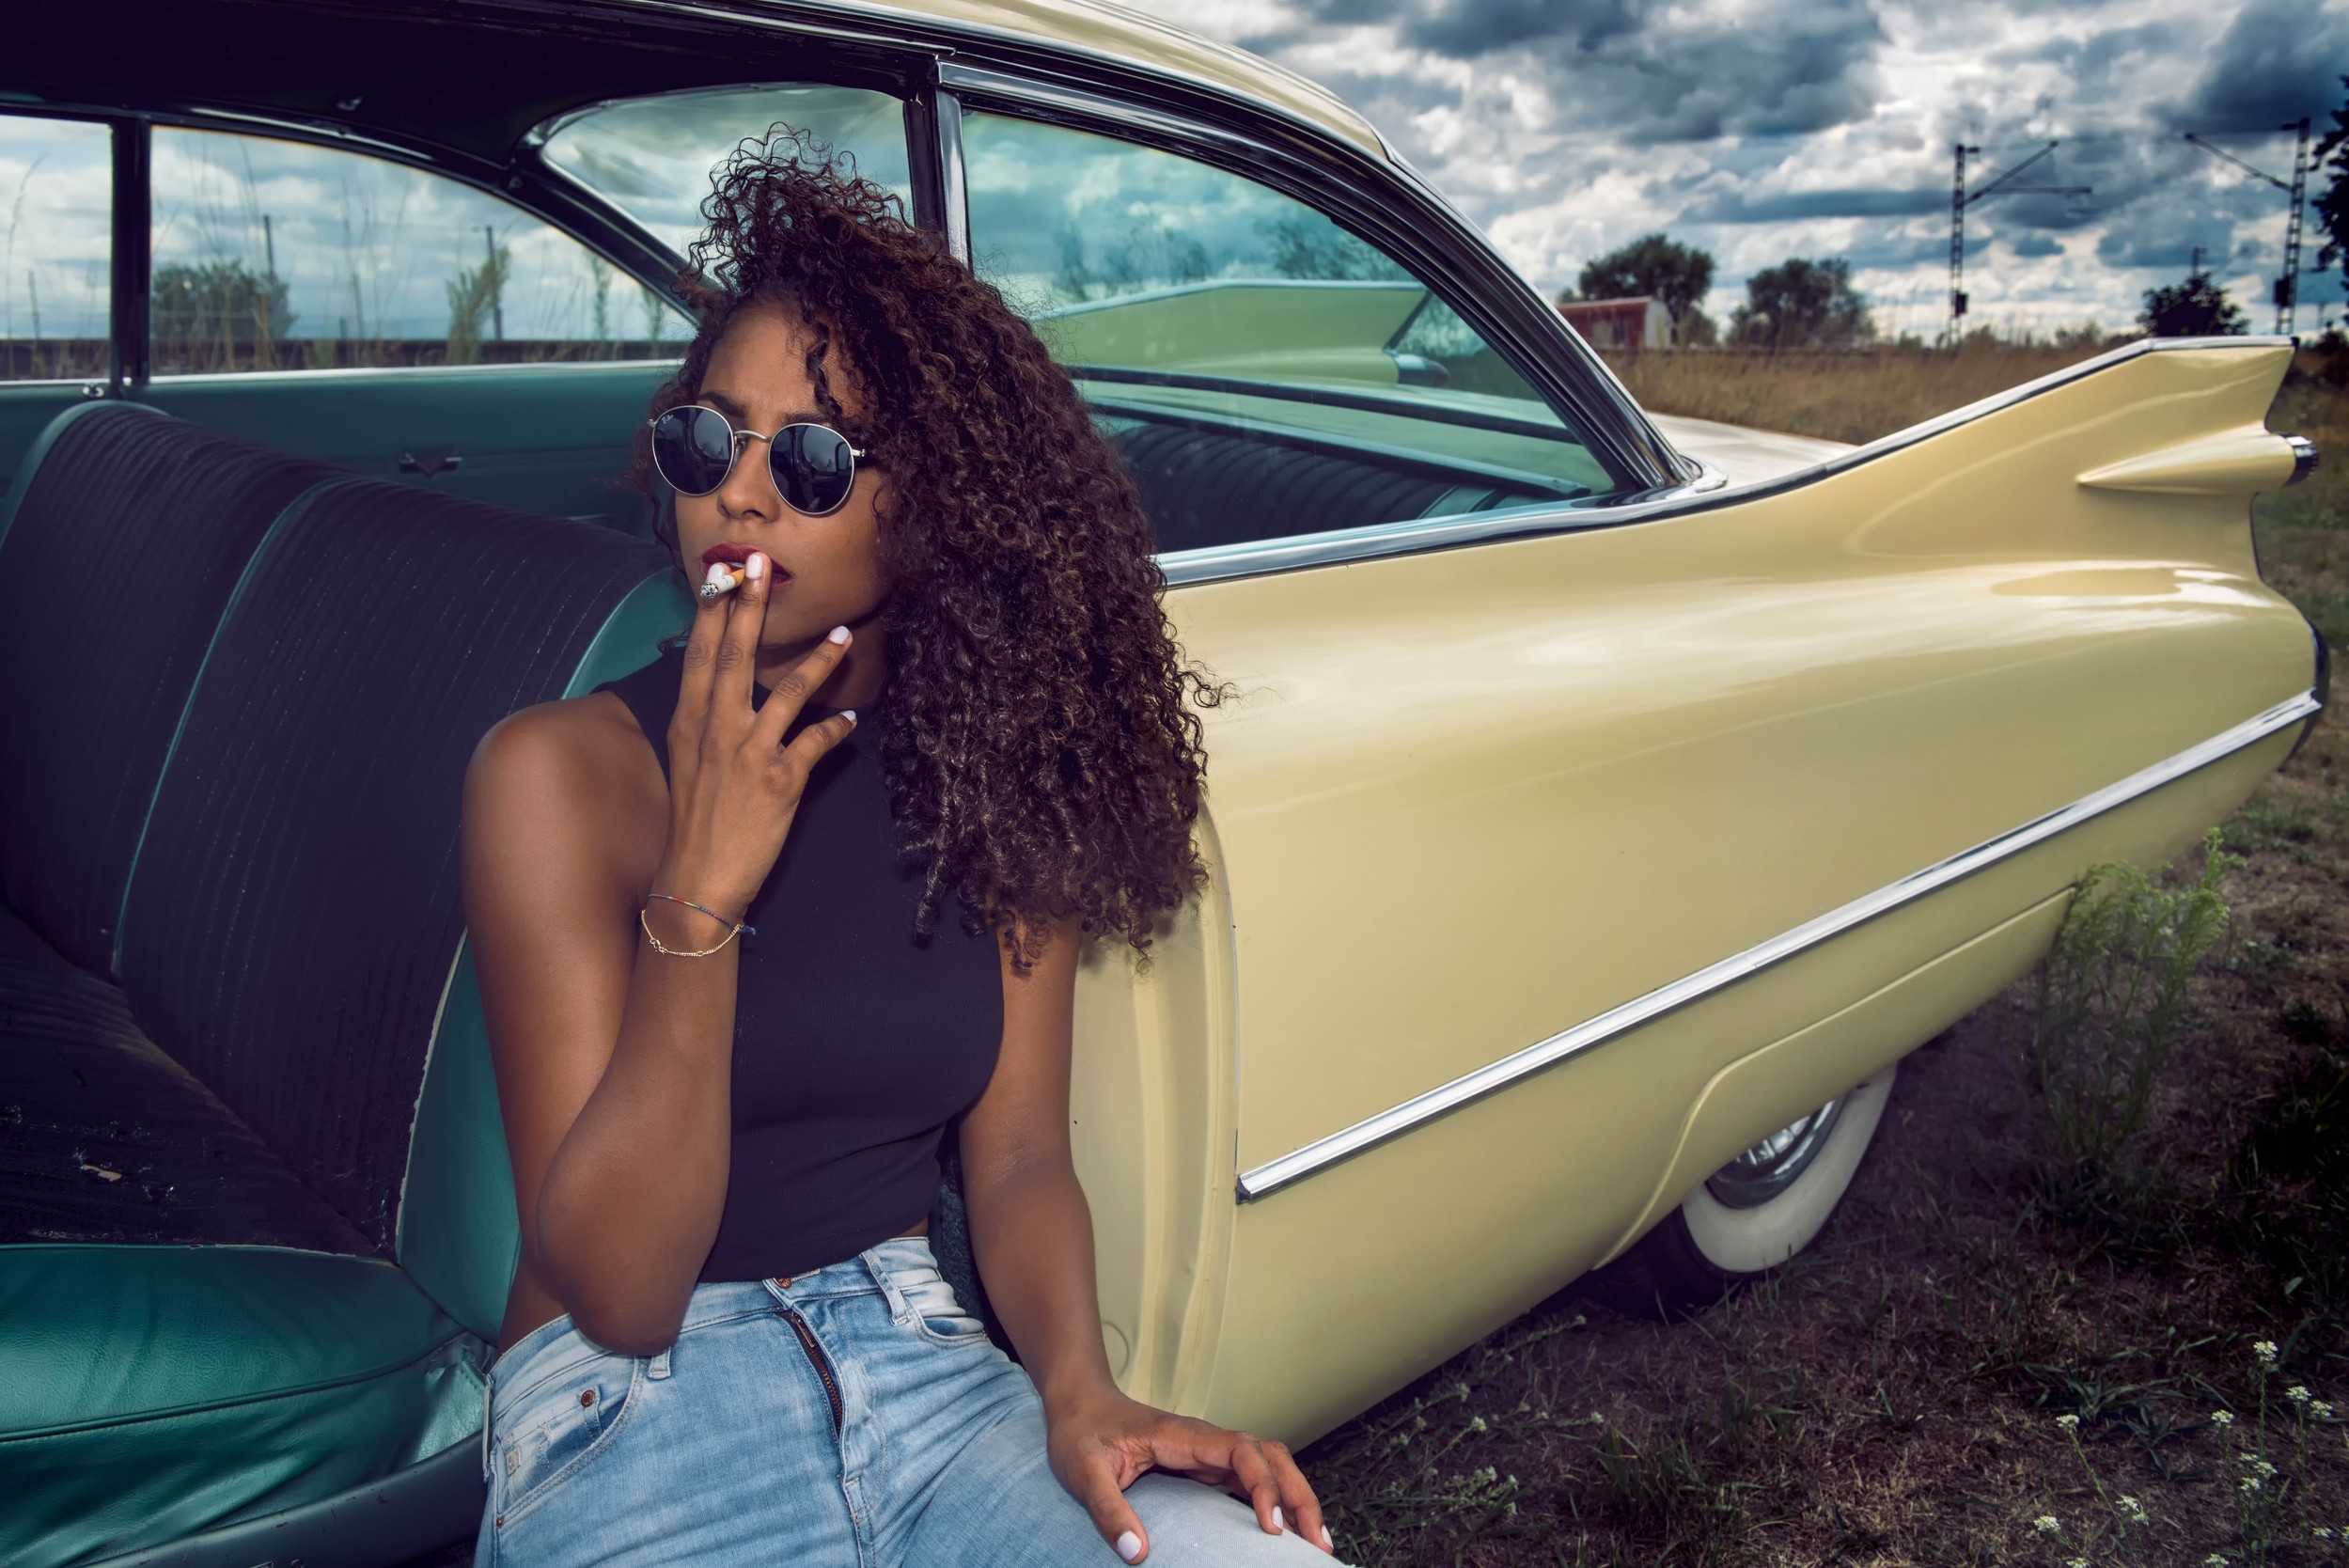 People 2499x1668 smoking women model vehicle car dark skin jeans women with shades women with cars cigarettes curly hair oldtimers sitting sunglasses red lipstick women outdoors outdoors